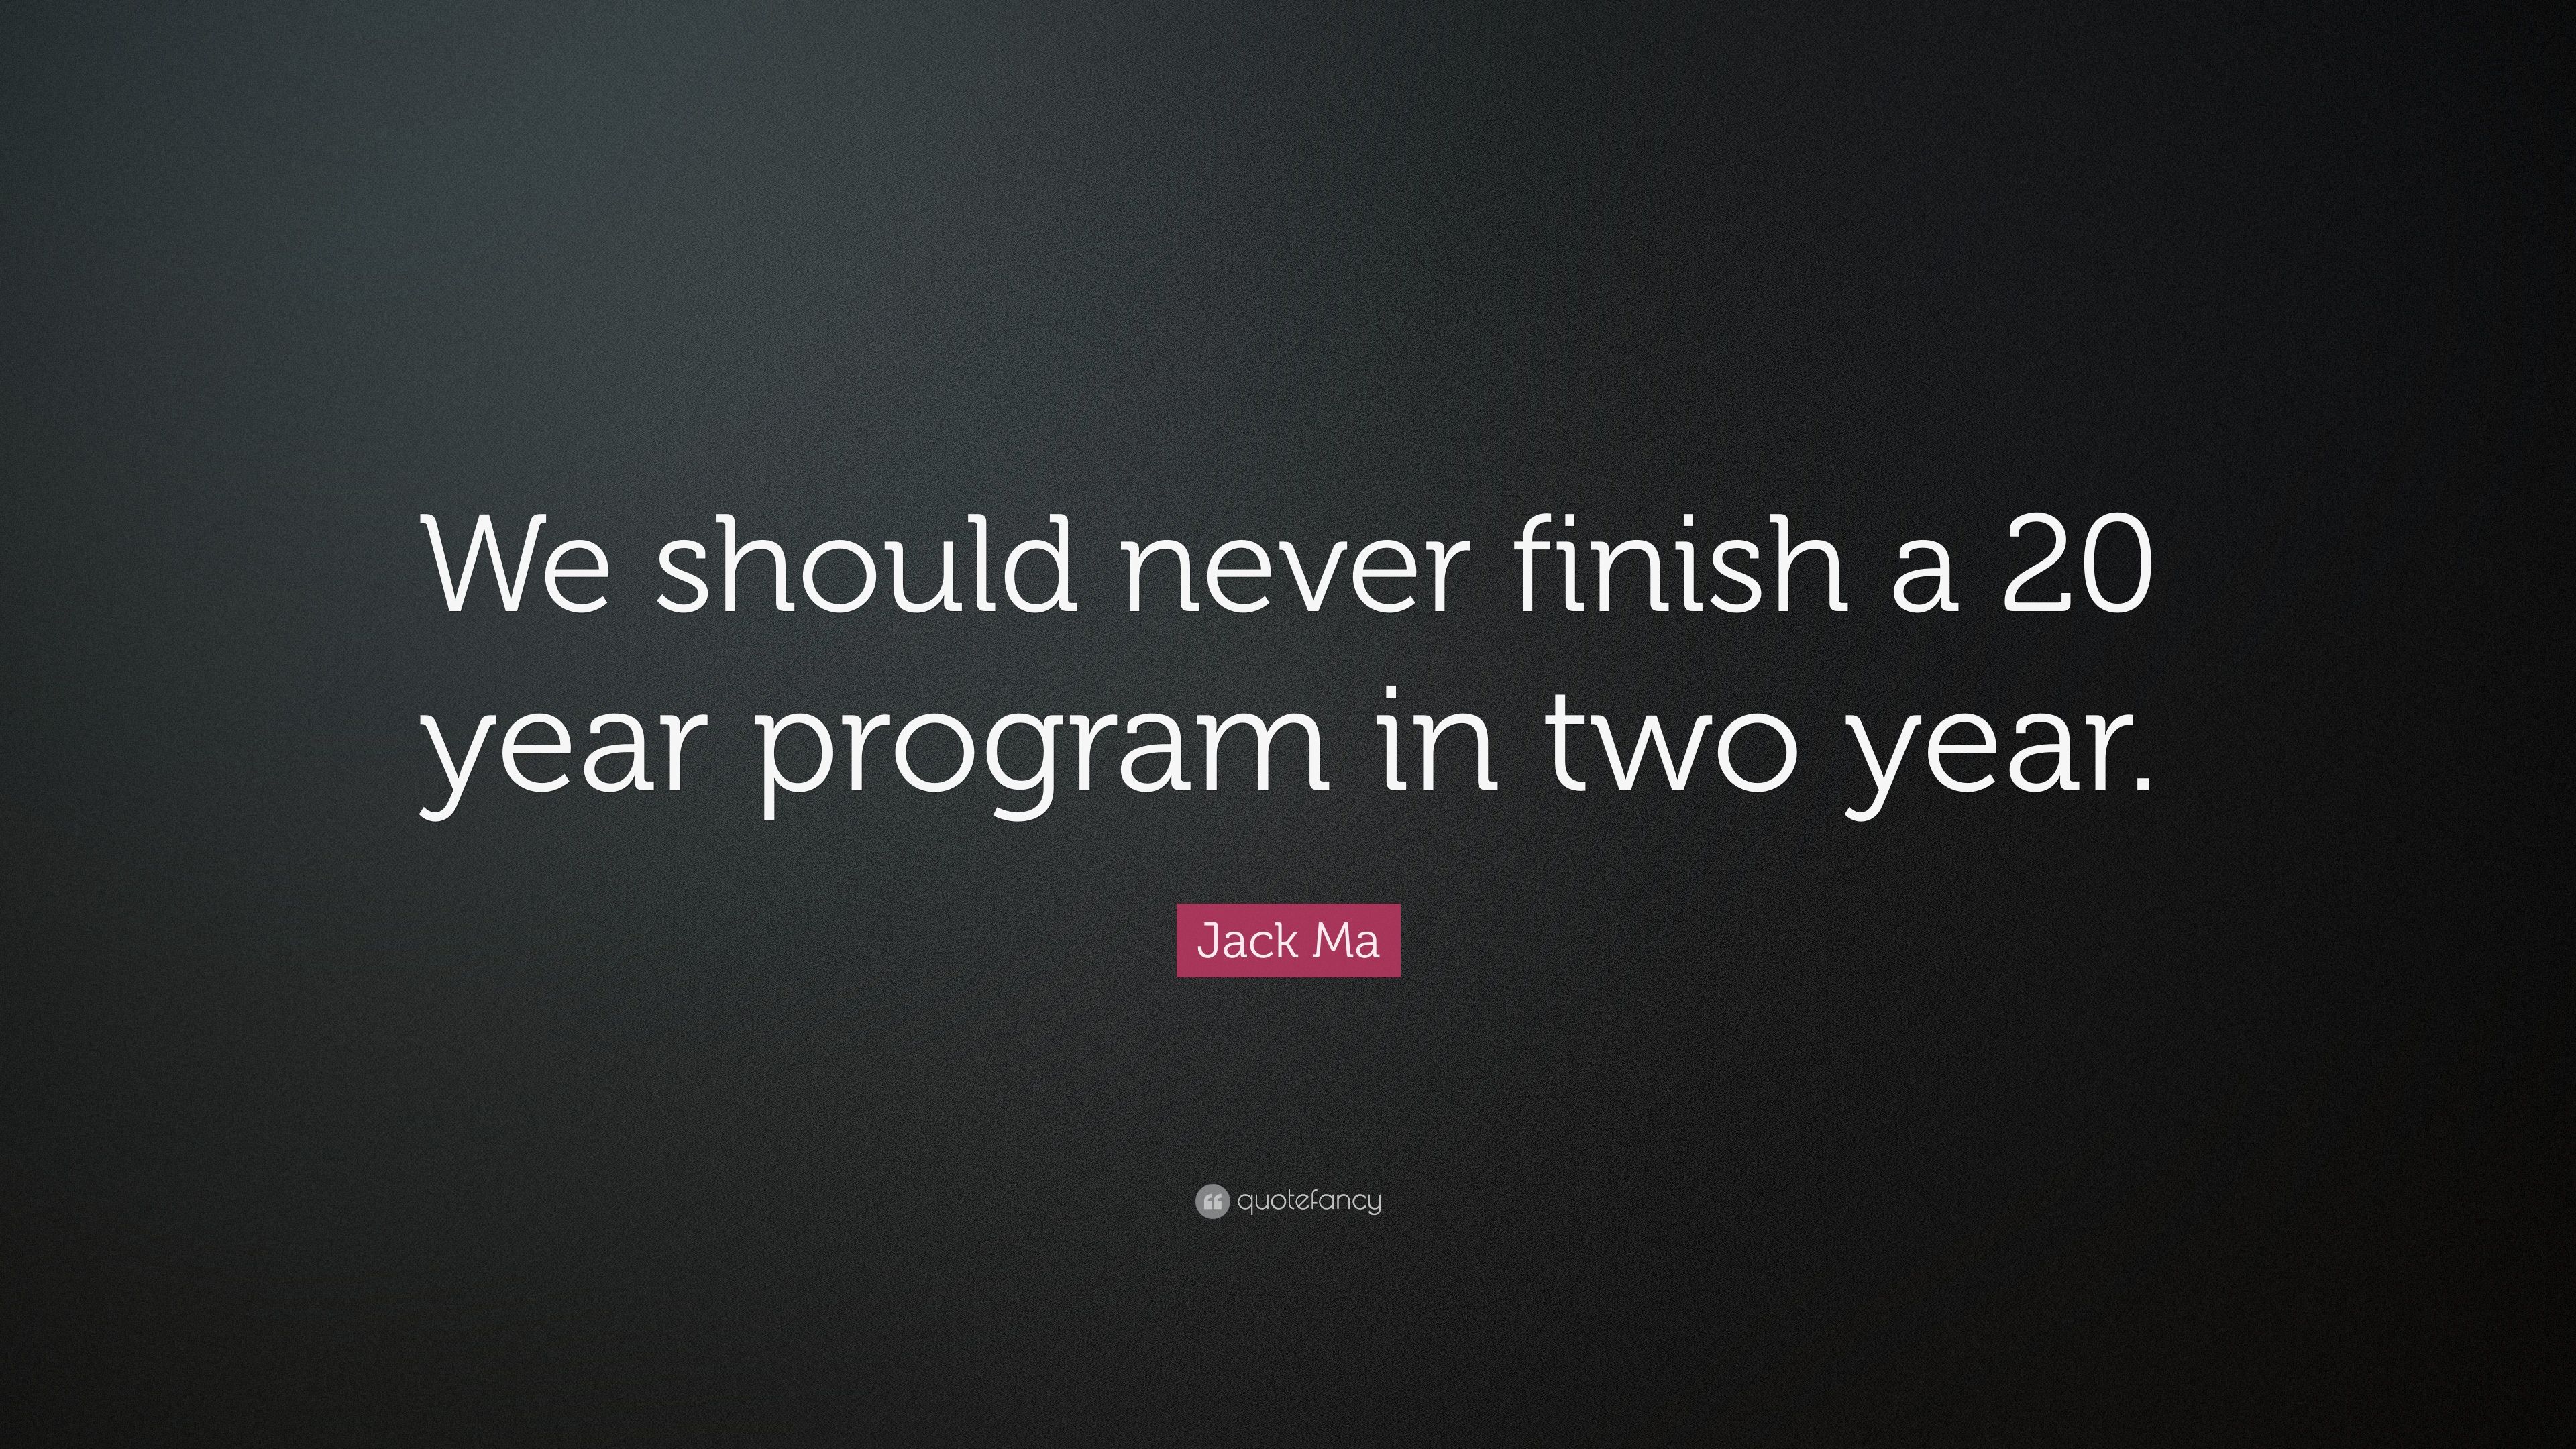 Jack Ma Quote: “We should never finish a 20 year program in two